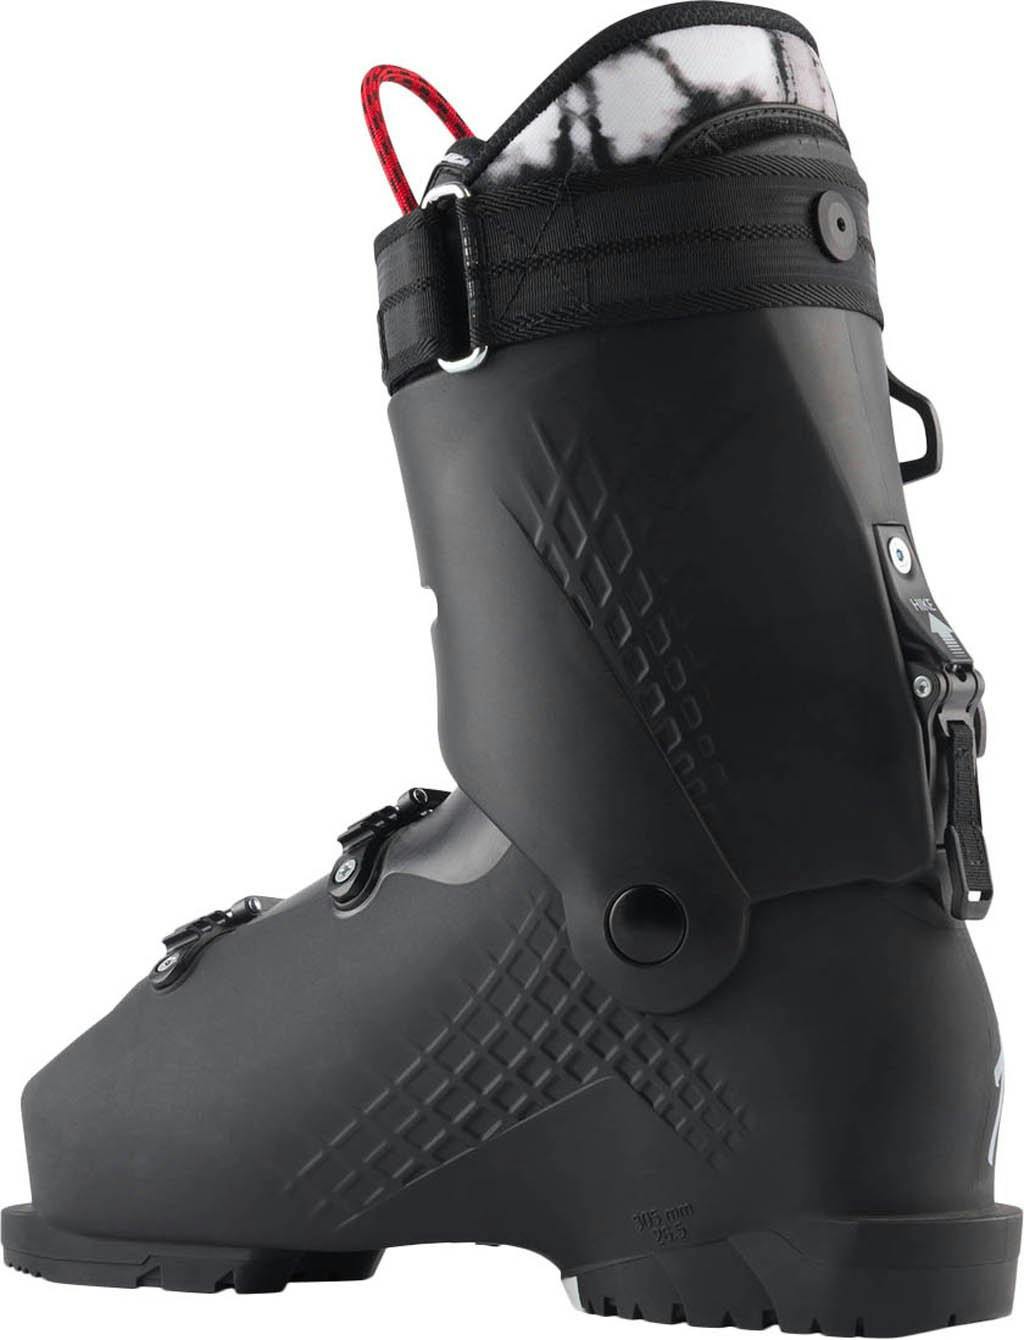 Product gallery image number 4 for product Alltrack 90 Hv All Mountain Ski Boots - Men's